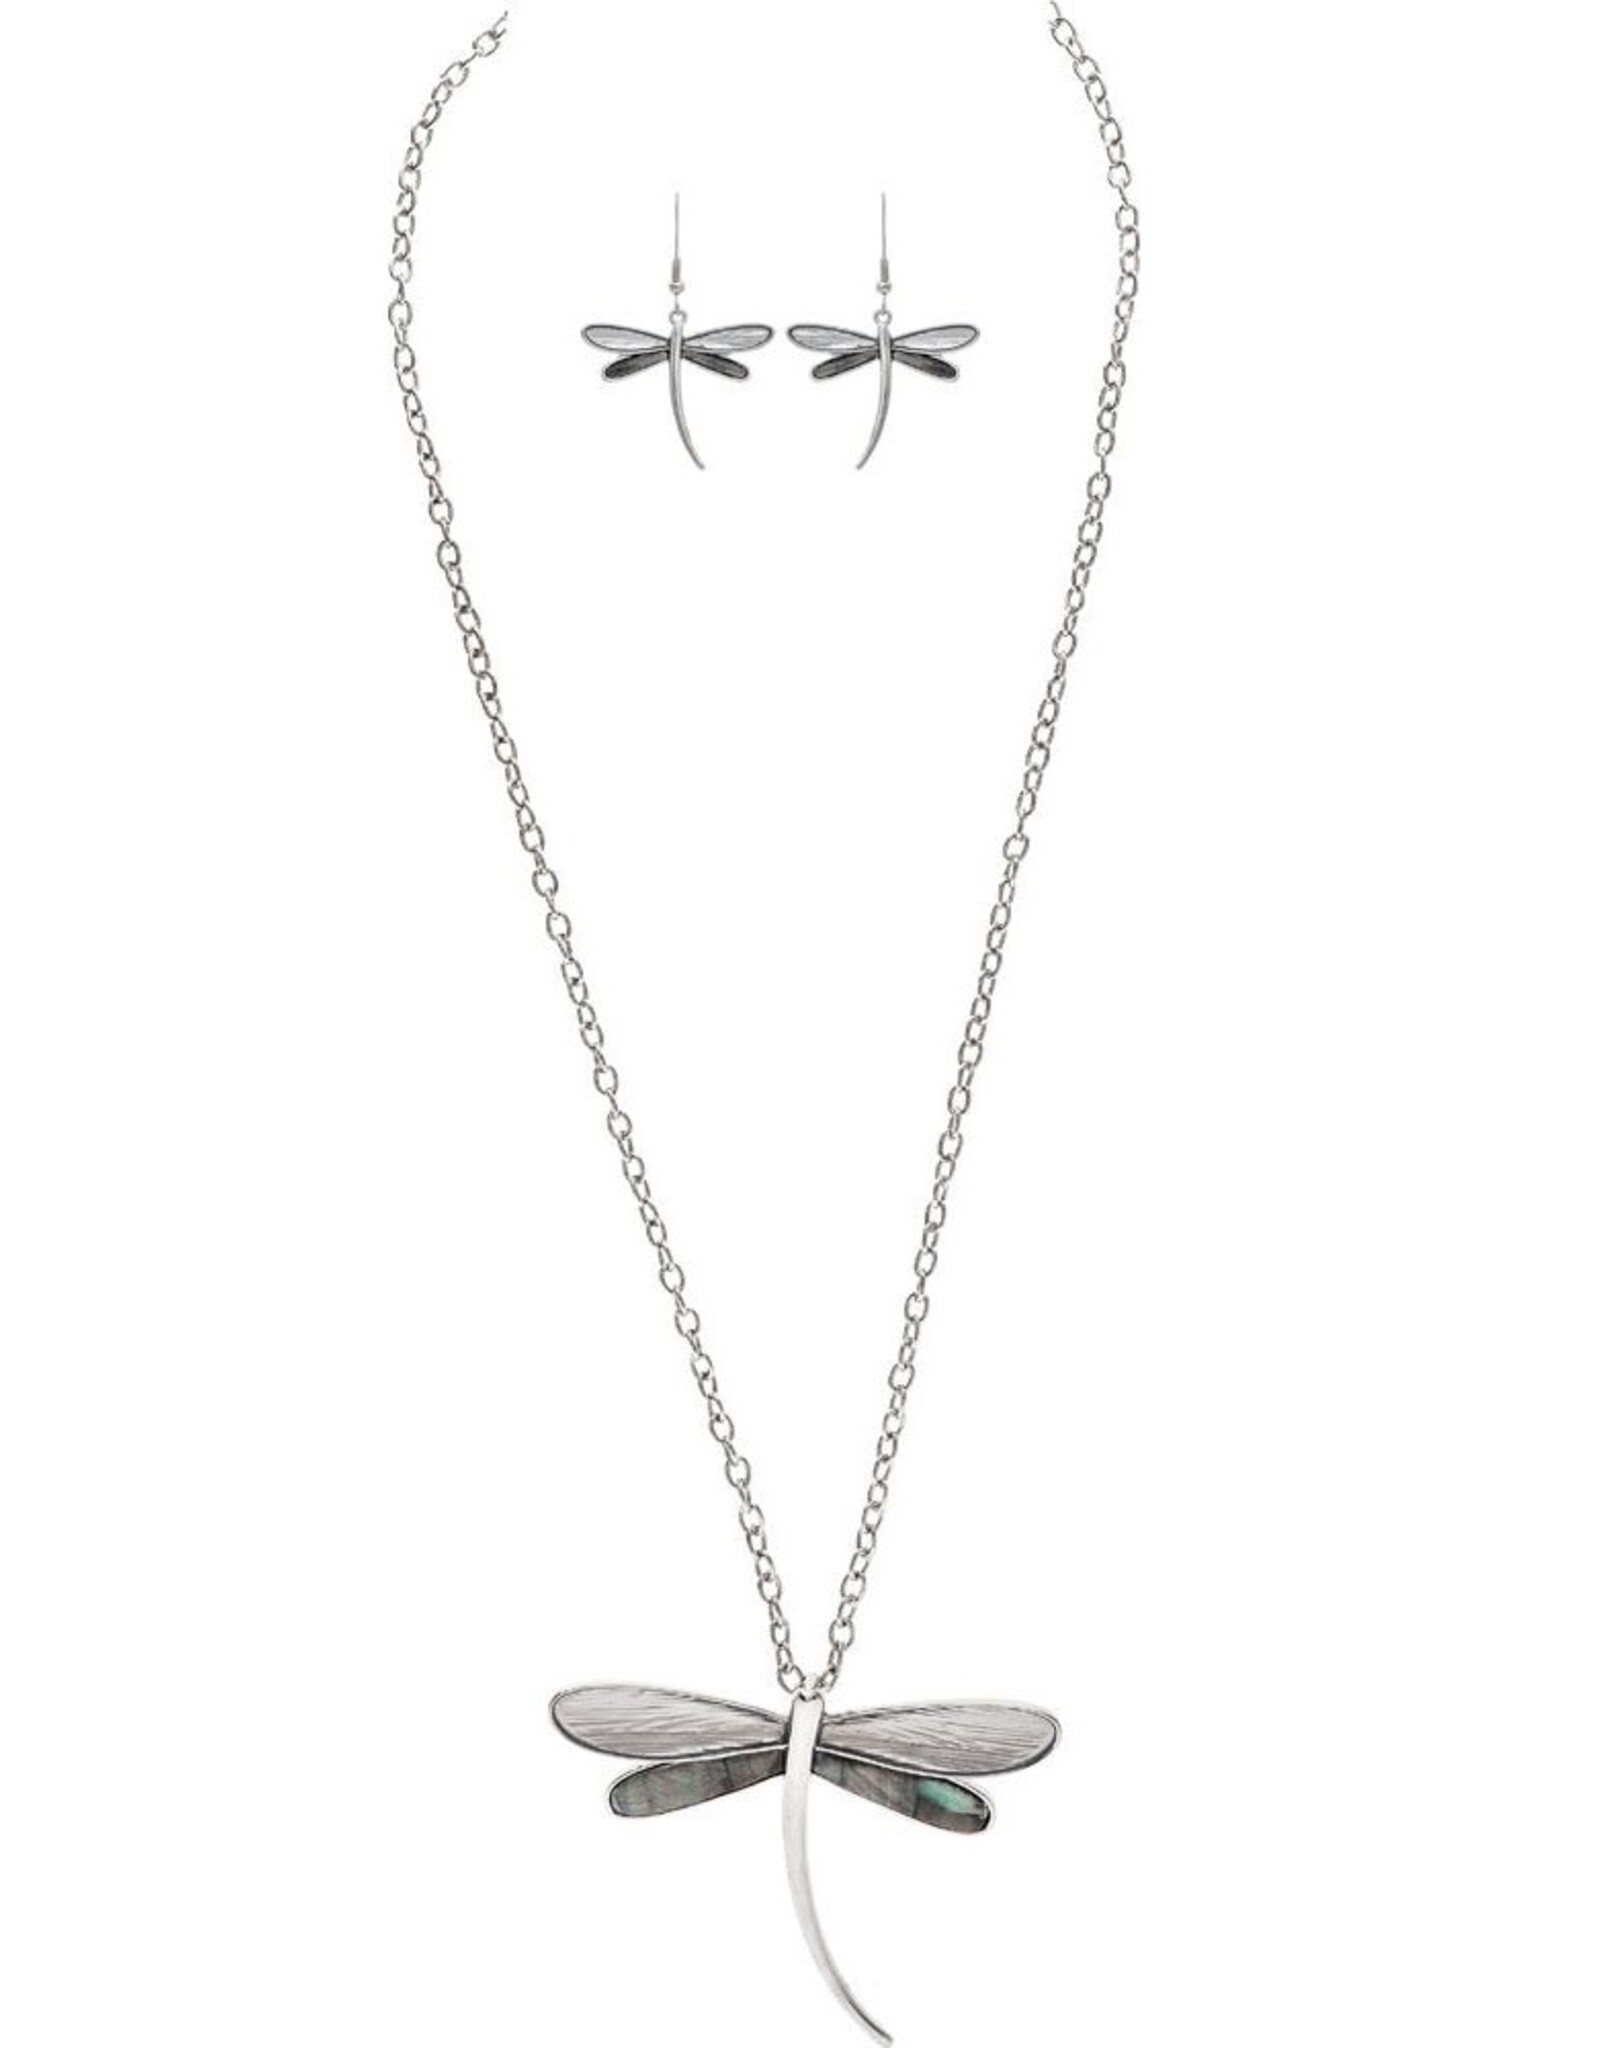 Rain Jewelry SILVER SHELL WINGS DRAGONFLY NECKLACE SET